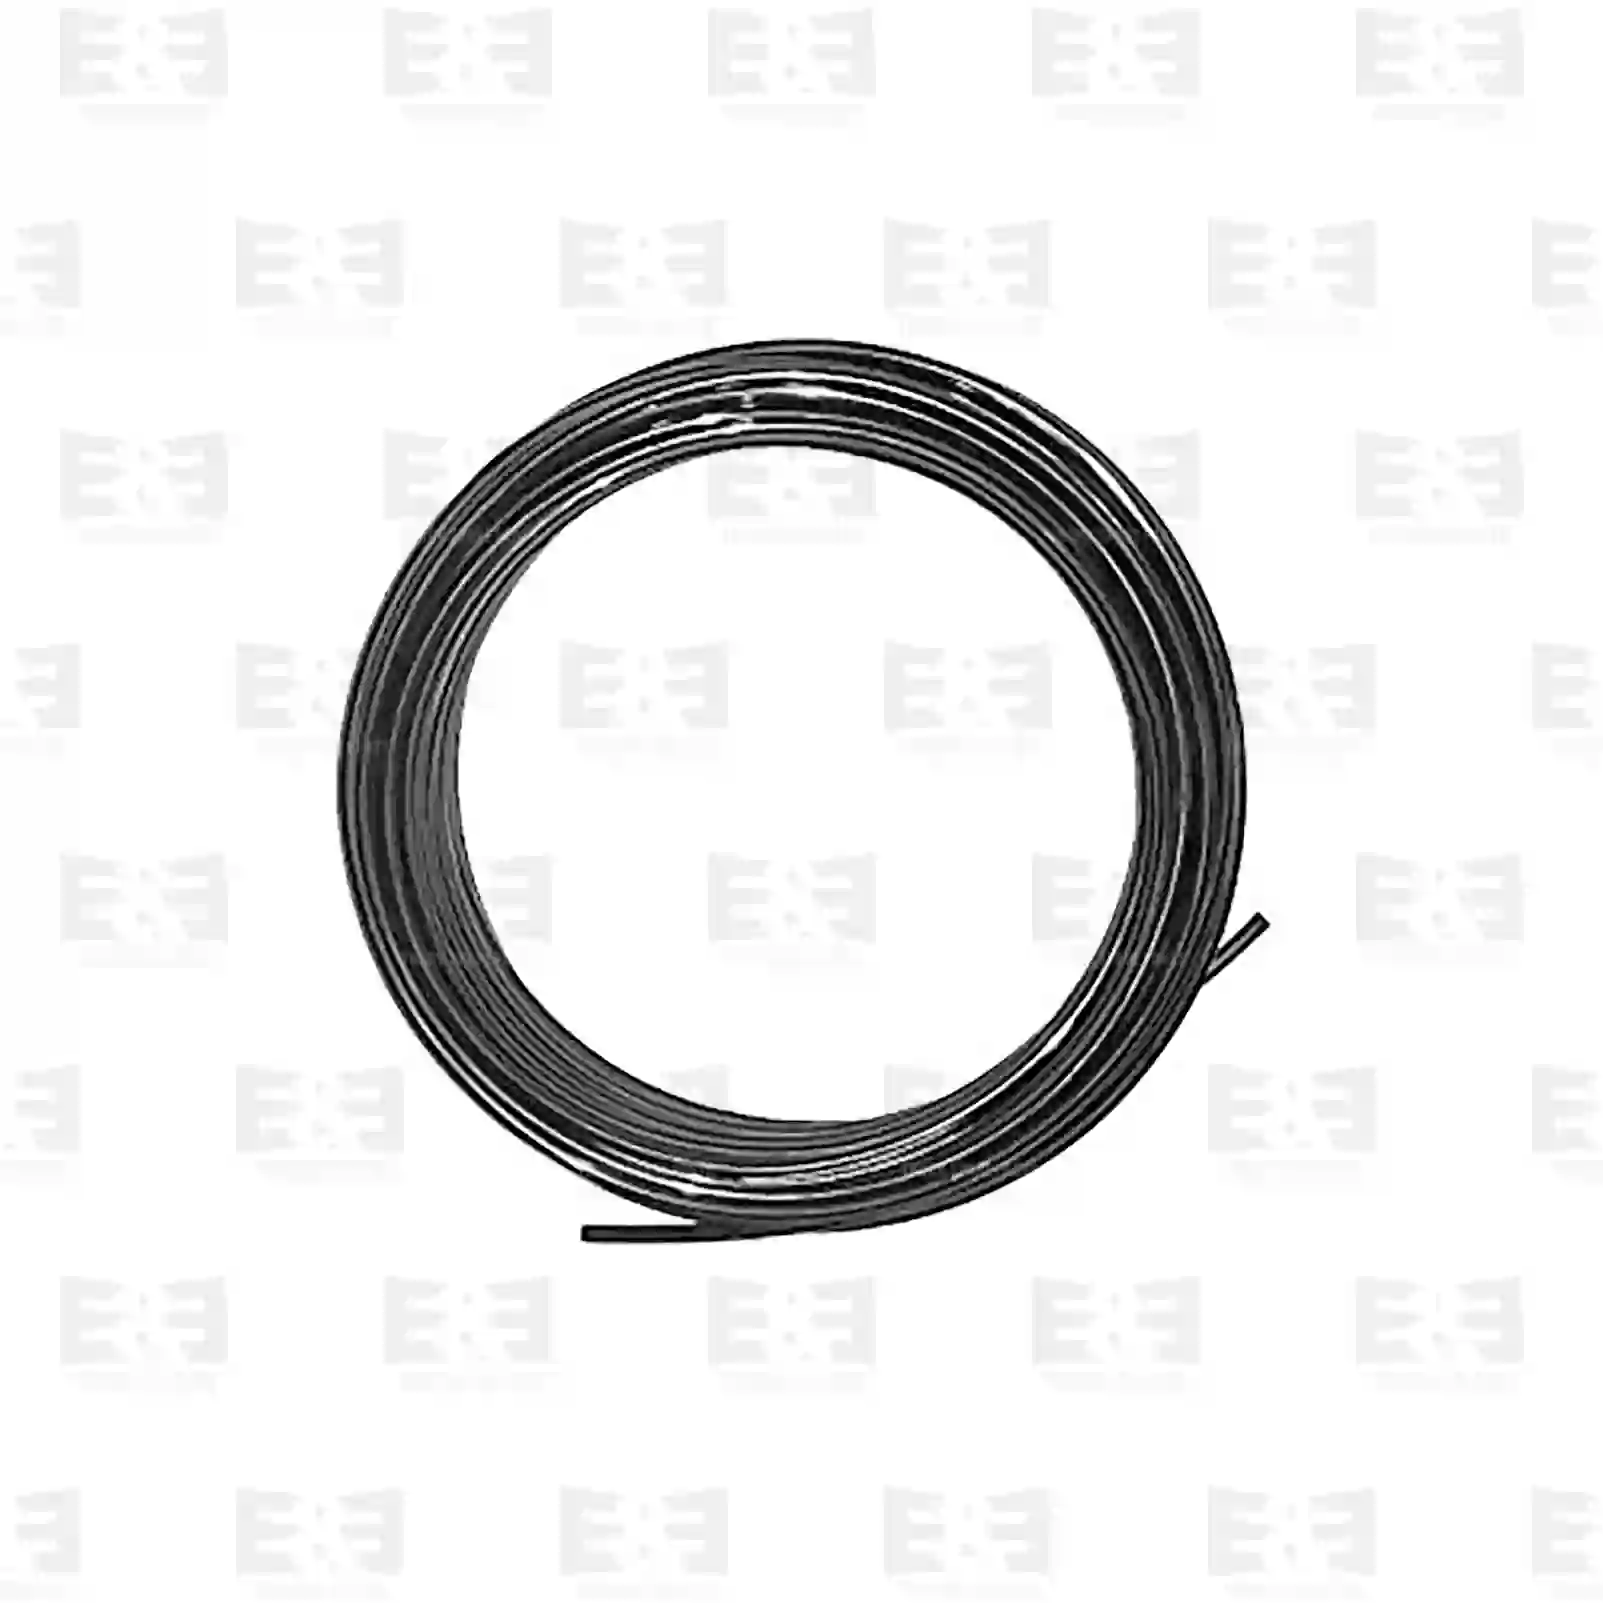 Compressed Air Nylon pipe, black, EE No 2E2285738 ,  oem no:0053102701, 5125957AA, 5133891AA, K05125957AA, 0799033, 0959033, 1399869, 1519680, 1917760, 799033, 959033, 04823129, 4823129, 98489309, 04351609008, 04351609207, 04351609708, 0009872727, 0009979082, 0089979082, 0109970182, 0109976982, 6360780925, 8282519166, 9014760101, 9014760201, 7400980832, 4309600300, 1483544, 1935151, 2443493, 2660376, 814805, 977745, 980832, ZG50531-0008 E&E Truck Spare Parts | Truck Spare Parts, Auotomotive Spare Parts